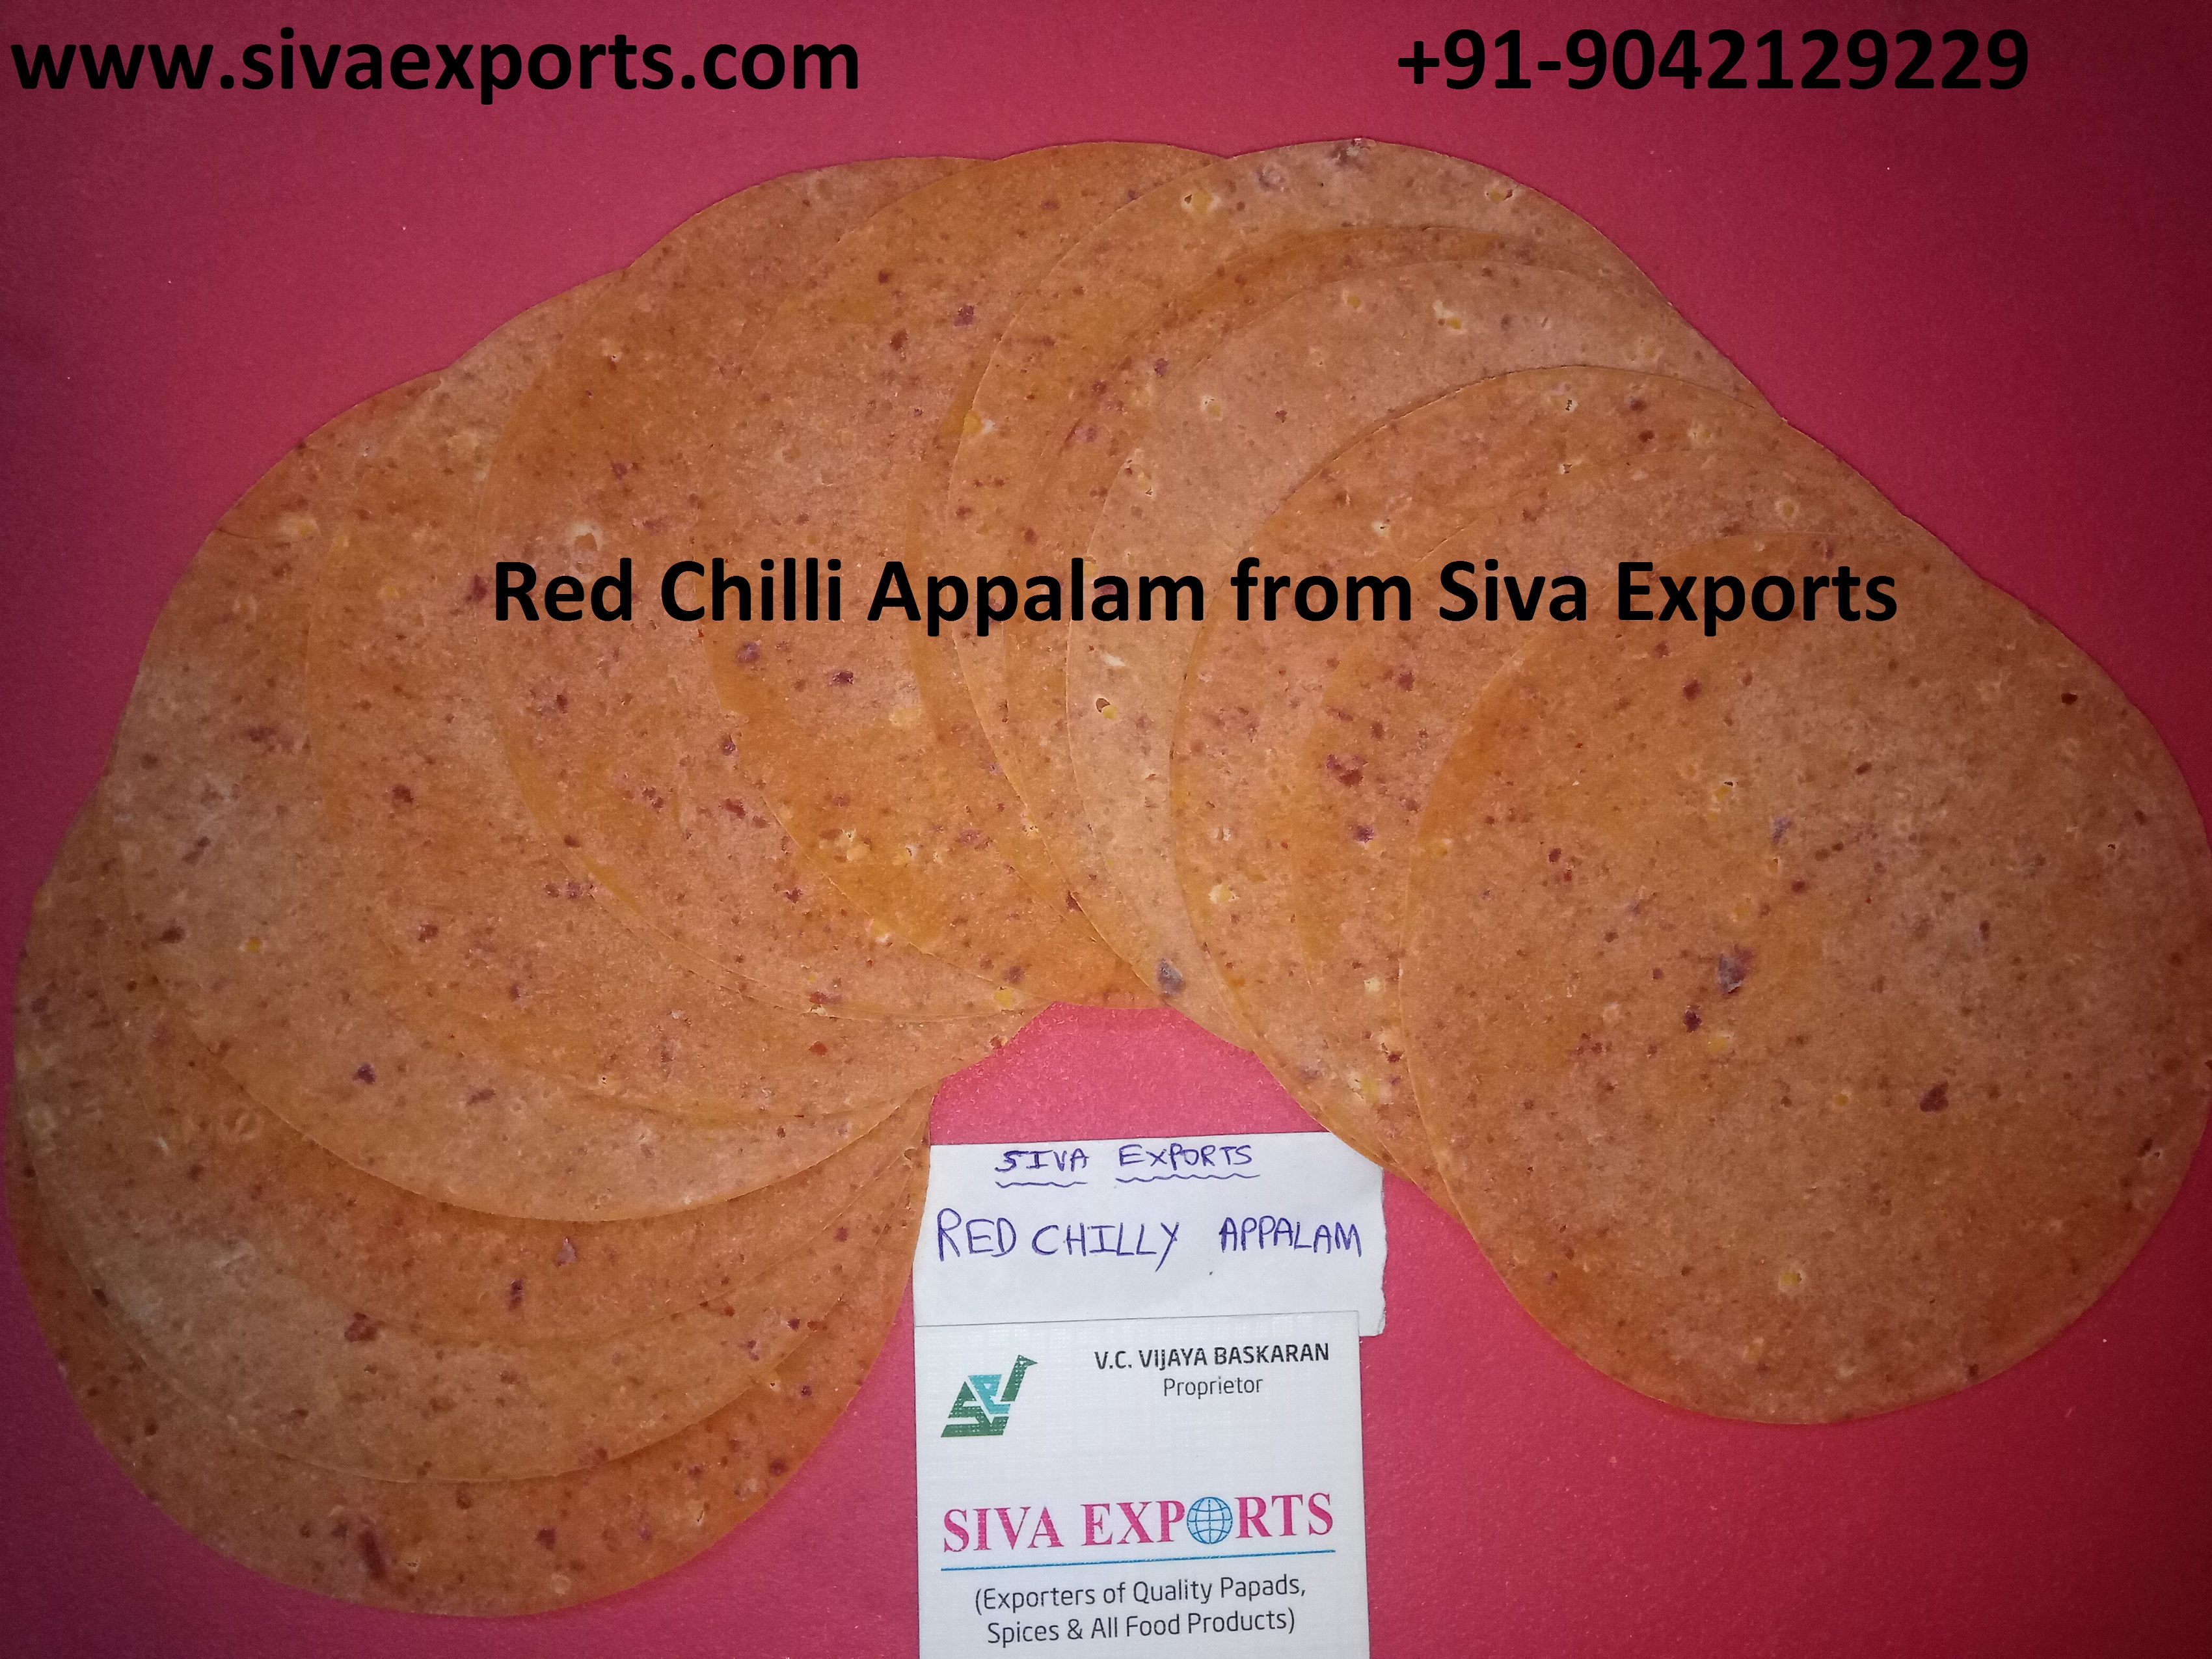 appalam manufacturers in india, papad manufacturers in india, appalam manufacturers in tamilnadu, papad manufacturers in tamilnadu, appalam manufacturers in madurai, papad manufacturers in madurai, appalam exporters in india, papad exporters in india, appalam exporters in tamilnadu, papad exporters in tamilnadu, appalam exporters in madurai, papad exporters in madurai, appalam wholesalers in india, papad wholesalers in india, appalam wholesalers in tamilnadu, papad wholesalers in tamilnadu, appalam wholesalers in madurai, papad wholesalers in madurai, appalam distributors in india, papad distributors in india, appalam distributors in tamilnadu, papad distributors in tamilnadu, appalam distributors in madurai, papad distributors in madurai, appalam suppliers in india, papad suppliers in india, appalam suppliers in tamilnadu, papad suppliers in tamilnadu, appalam suppliers in madurai, papad suppliers in madurai, appalam dealers in india, papad dealers in india, appalam dealers in tamilnadu, papad dealers in tamilnadu, appalam dealers in madurai, papad dealers in madurai, appalam companies in india, appalam companies in tamilnadu, appalam companies in madurai, papad companies in india, papad companies in tamilnadu, papad companies in madurai, appalam company in india, appalam company in tamilnadu, appalam company in madurai, papad company in india, papad company in tamilnadu, papad company in madurai, appalam factory in india, appalam factory in tamilnadu, appalam factory in madurai, papad factory in india, papad factory in tamilnadu, papad factory in madurai, appalam factories in india, appalam factories in tamilnadu, appalam factories in madurai, papad factories in india, papad factories in tamilnadu, papad factories in madurai, appalam production units in india, appalam production units in tamilnadu, appalam production units in madurai, papad production units in india, papad production units in tamilnadu, papad production units in madurai, pappadam manufacturers in india, poppadom manufacturers in india, pappadam manufacturers in tamilnadu, poppadom manufacturers in tamilnadu, pappadam manufacturers in madurai, poppadom manufacturers in madurai, appalam manufacturers, papad manufacturers, pappadam manufacturers, pappadum exporters in india, pappadam exporters in india, poppadom exporters in india, pappadam exporters in tamilnadu, pappadum exporters in tamilnadu, poppadom exporters in tamilnadu, pappadum exporters in madurai, pappadam exporters in madurai, poppadom exporters in Madurai, pappadum wholesalers in madurai, pappadam wholesalers in madurai, poppadom wholesalers in Madurai, pappadum wholesalers in tamilnadu, pappadam wholesalers in tamilnadu, poppadom wholesalers in Tamilnadu, pappadam wholesalers in india, poppadom wholesalers in india, pappadum wholesalers in india, appalam retailers in india, papad retailers in india, appalam retailers in tamilnadu, papad retailers in tamilnadu, appalam retailers in madurai, papad retailers in madurai, appalam, papad, Siva Exports, Orange Appalam, Orange Papad, Lion Brand Appalam, Siva Appalam, Lion brand Papad, Sivan Appalam, Orange Pappadam, appalam, papad, papadum, papadam, papadom, pappad, pappadum, pappadam, pappadom, poppadom, popadom, poppadam, popadam, poppadum, popadum, appalam manufacturers, papad manufacturers, papadum manufacturers, papadam manufacturers, pappadam manufacturers, pappad manufacturers, pappadum manufacturers, pappadom manufacturers, poppadom manufacturers, papadom manufacturers, popadom manufacturers, poppadum manufacturers, popadum manufacturers, popadam manufacturers, poppadam manufacturers, cumin appalam, red chilli appalam, green chilli appalam, pepper appalam, garmic appalam, calcium appalam, plain appalam manufacturers in india,tamilnadu,madurai plain appalam manufacturers in india, cumin appalam manufacturers in india, pepper appalam manufacturers in india, red chilli appalam manufacturers in india,, green chilli appalam manufacturers in india, garlic appalam manufacturers in india, calcium appalam manufacturers in india, plain Papad manufacturers in india, cumin Papad manufacturers in india, pepper Papad manufacturers in india, red chilli Papad manufacturers in india,, green chilli Papad manufacturers in india, garlic Papad manufacturers in india, calcium Papad manufacturers in india, plain appalam manufacturers in Tamilnadu, cumin appalam manufacturers in Tamilnadu, pepper appalam manufacturers in Tamilnadu, red chilli appalam manufacturers in Tamilnadu, green chilli appalam manufacturers in Tamilnadu, garlic appalam manufacturers in Tamilnadu, calcium appalam manufacturers in Tamilnadu, plain Papad manufacturers in Tamilnadu, cumin Papad manufacturers in Tamilnadu, pepper Papad manufacturers in Tamilnadu, red chilli Papad manufacturers in Tamilnadu,, green chilli Papad manufacturers in Tamilnadu, garlic Papad manufacturers in Tamilnadu, calcium Papad manufacturers in Tamilnadu, plain appalam manufacturers in india, cumin appalam manufacturers in india, pepper appalam manufacturers in india, red chilli appalam manufacturers in india, green chilli appalam manufacturers in india, garlic appalam manufacturers in india, calcium appalam manufacturers in india, plain Papad manufacturers in india, cumin Papad manufacturers in india, pepper Papad manufacturers in india, red chilli Papad manufacturers in india,, green chilli Papad manufacturers in india, garlic Papad manufacturers in india, calcium Papad manufacturers in india, appalam manufacturers, papad manufacturers, pappadam manufacturers, papadum manufacturers, papadam manufacturers, pappad manufacturers, pappadum manufacturers, poppadom manufacturers, papadom manufacturers, popadom manufacturers, poppadum manufacturers, popadum manufacturers, popadam manufacturers, poppadam manufacturers, pappadom manufacturers, appalam manufacturers in india, papad manufacturers in india, pappadam manufacturers in india, papadum manufacturers in india, papadam manufacturers in india, pappad manufacturers in india, pappadum manufacturers in india, poppadom manufacturers in india, papadom manufacturers in india, popadom manufacturers in india, poppadum manufacturers in india, popadum manufacturers in india, popadam manufacturers in india, poppadam manufacturers in india, pappadom manufacturers in india, appalam manufacturers in tamilnadu, papad manufacturers in tamilnadu, pappadam manufacturers in tamilnadu, papadum manufacturers in tamilnadu, papadam manufacturers in tamilnadu, pappad manufacturers in tamilnadu, pappadum manufacturers in tamilnadu, poppadom manufacturers in tamilnadu, papadom manufacturers in tamilnadu, popadom manufacturers in tamilnadu, poppadum manufacturers in tamilnadu, popadum manufacturers in tamilnadu, popadam manufacturers in tamilnadu, poppadam manufacturers in tamilnadu, pappadom manufacturers in tamilnadu, appalam manufacturers in madurai, papad manufacturers in madurai, pappadam manufacturers in madurai, papadum manufacturers in madurai, papadam manufacturers in madurai, pappad manufacturers in madurai, pappadum manufacturers in madurai, poppadom manufacturers in madurai, papadom manufacturers in madurai, popadom manufacturers in madurai, poppadum manufacturers in madurai, popadum manufacturers in madurai, popadam manufacturers in madurai, poppadam manufacturers in madurai, pappadom manufacturers in madurai, 